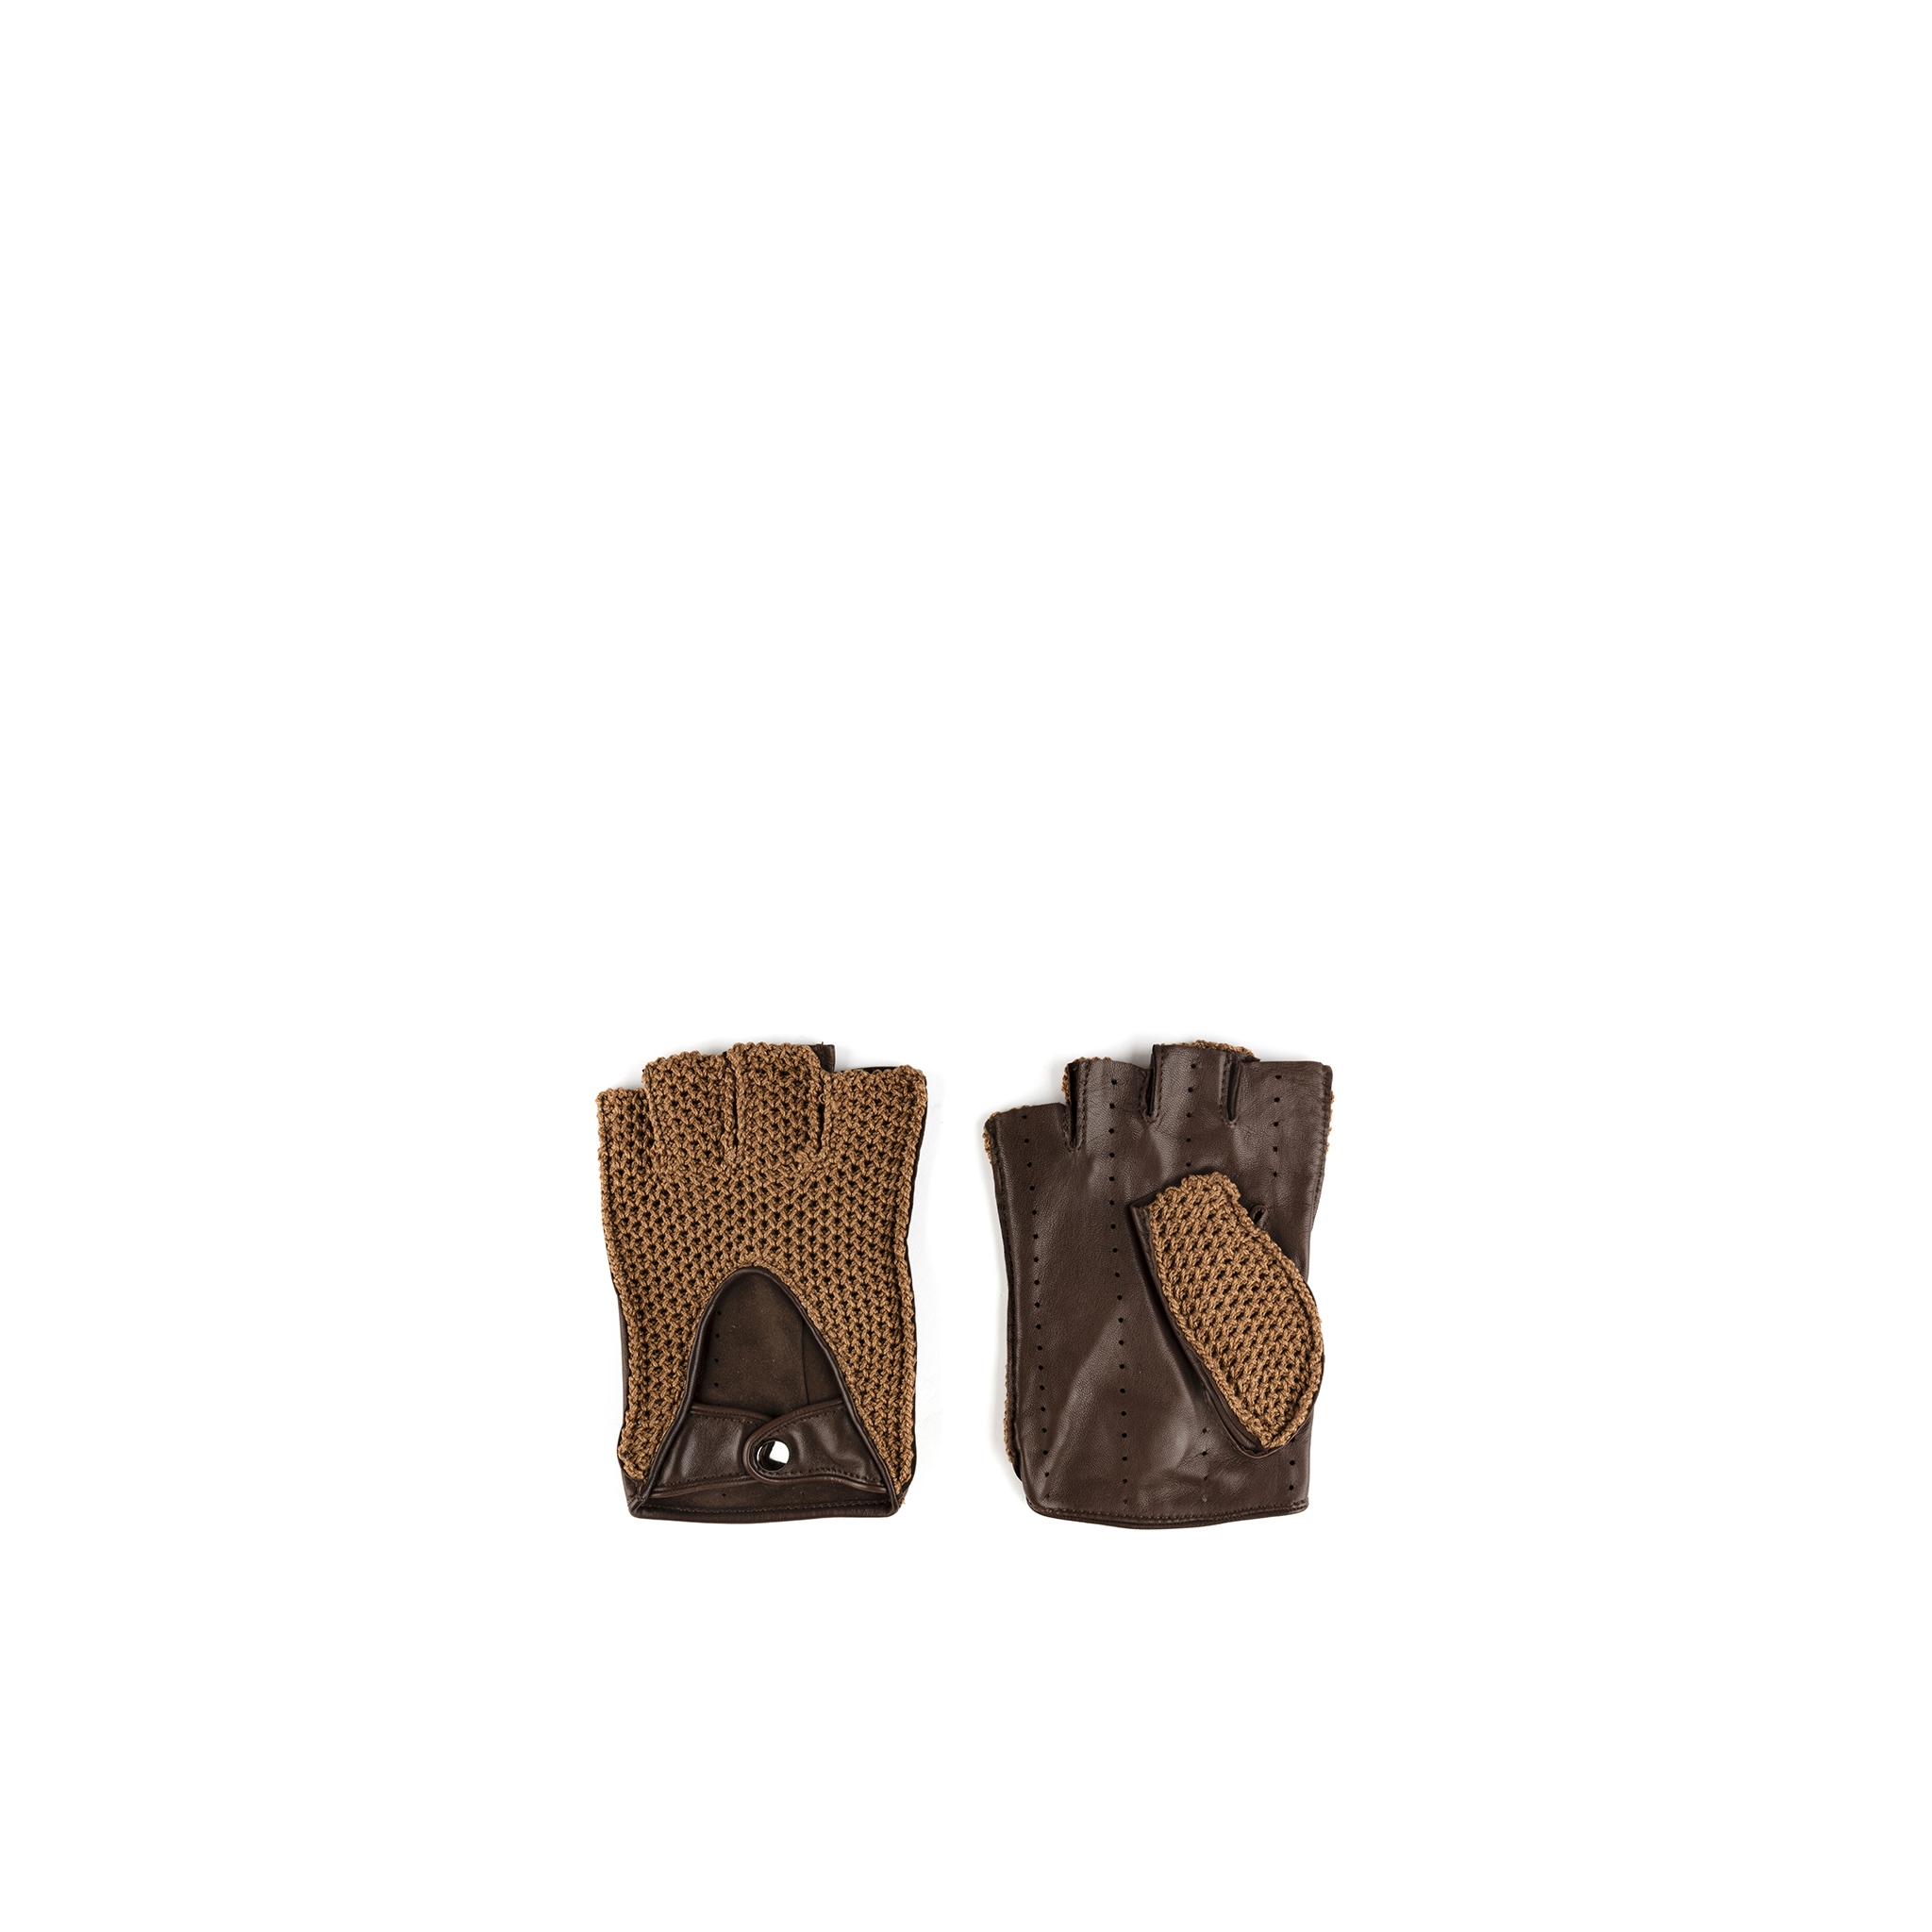 1950 Knitted Mittens - Mesh and glossy leather - Brown color